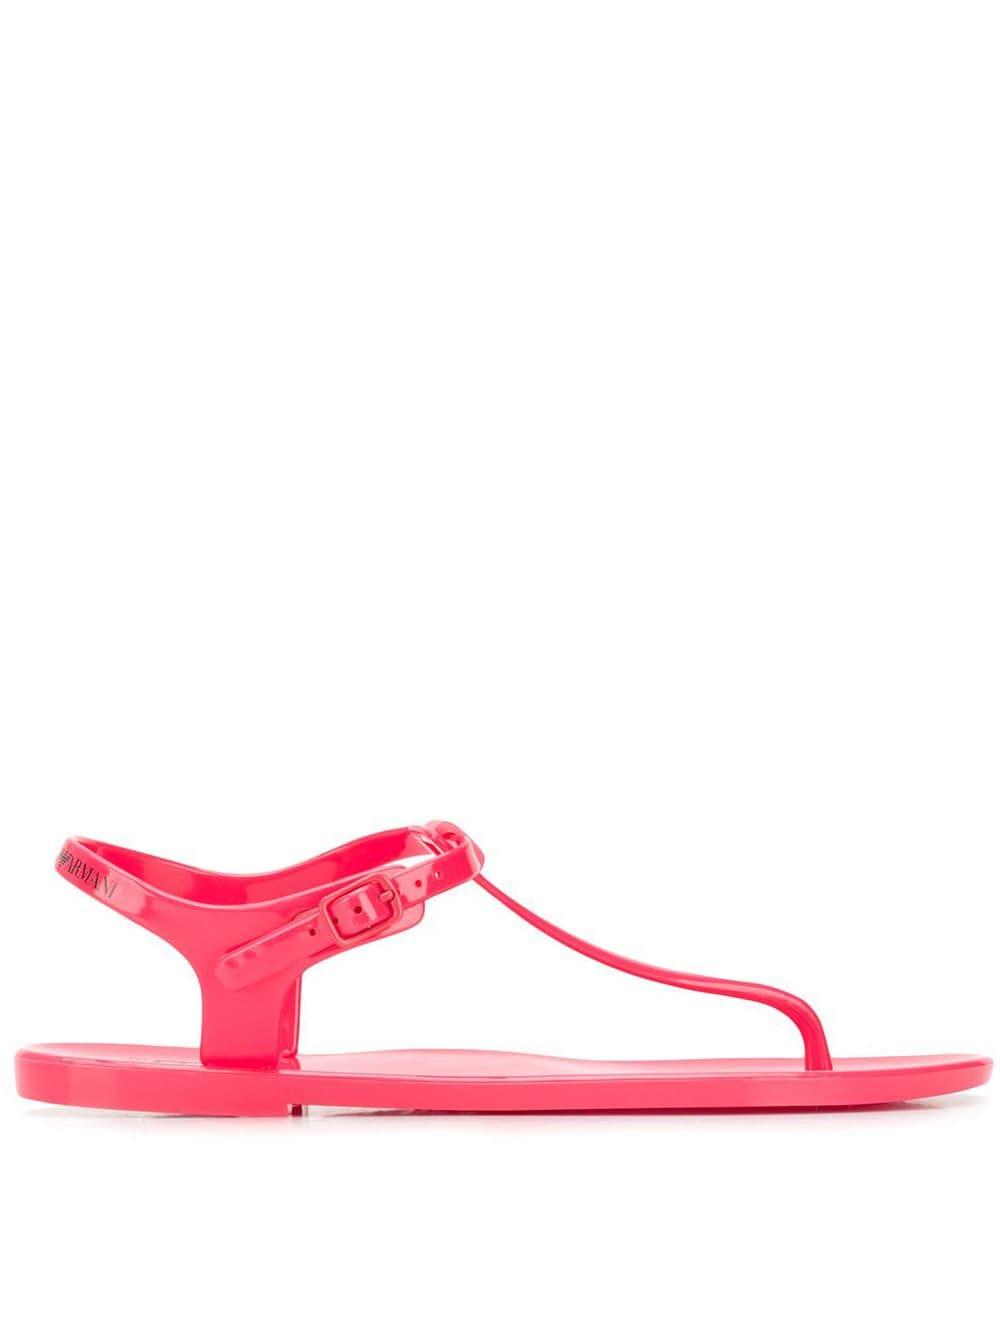 EA7 Thong Strap Sandals in Pink - Lyst